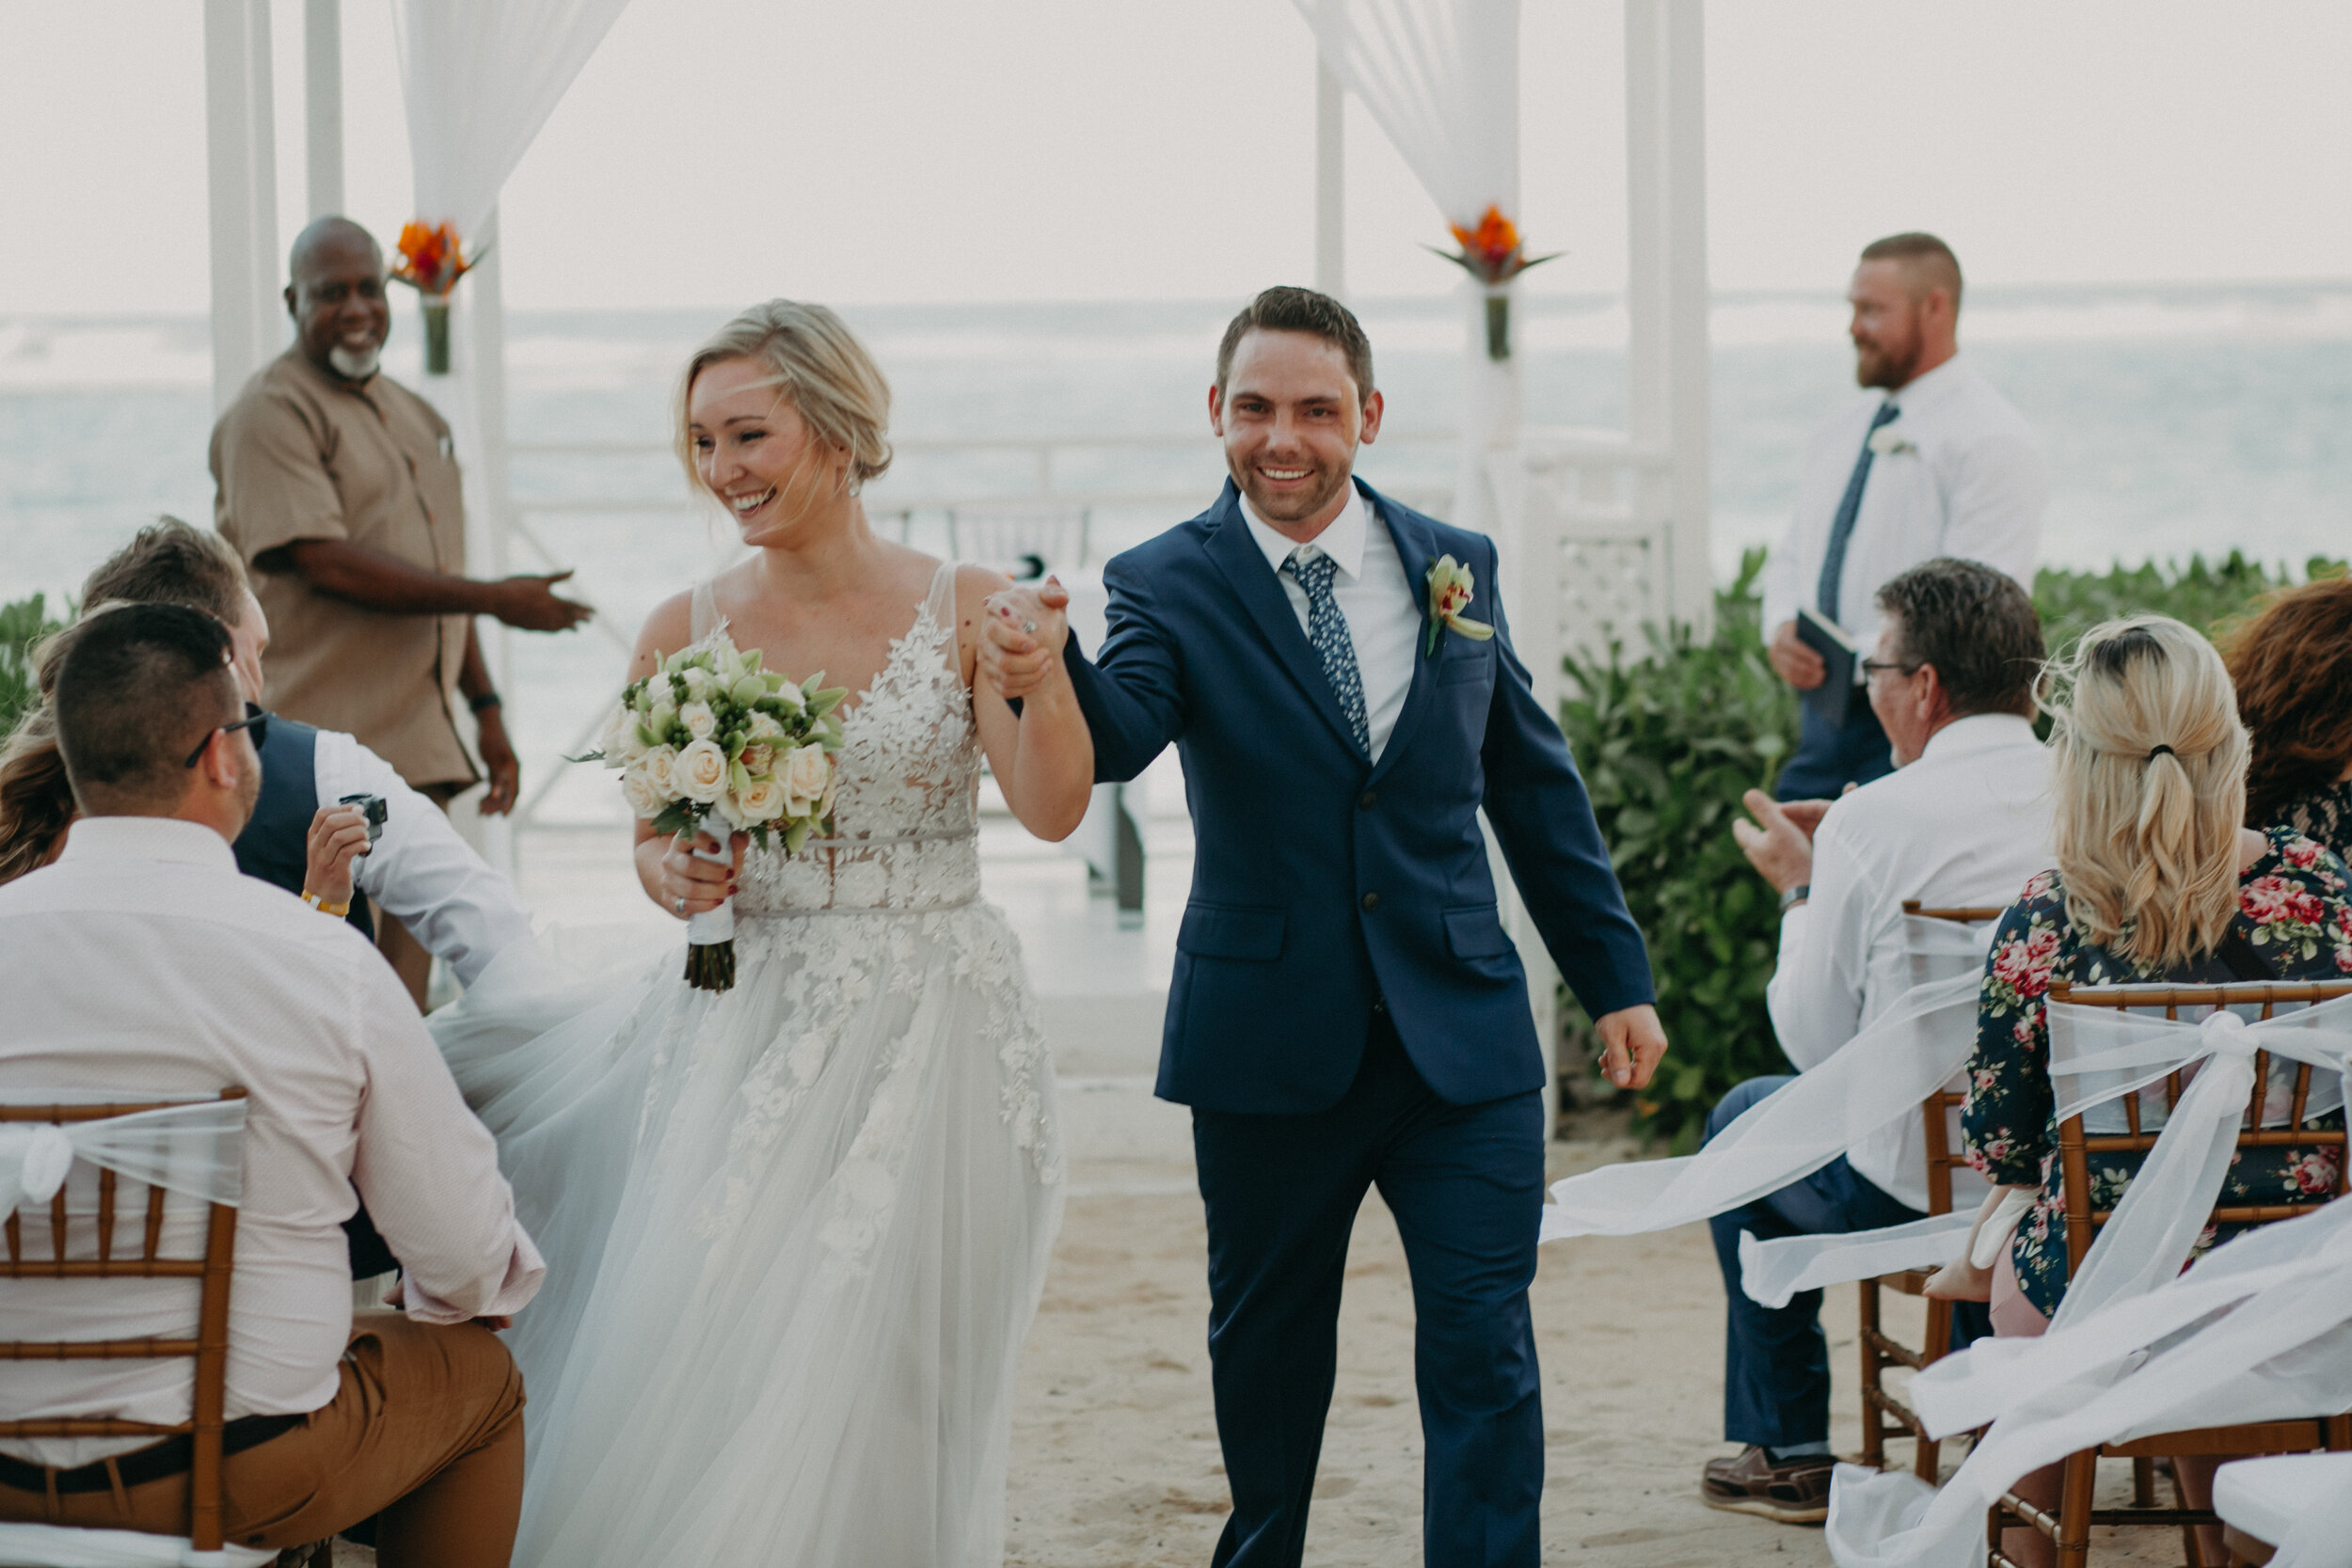  a couple elopes to Jamaica with their wedding photographer Andrea Wagner #jamaicaelopement #jamaicabeachwedding #ochoriosbeachwedding #jamaicaweddingphotographer #jamaicaelopementphotographer #ochorioselopement #ochorioselopementphotographer #elopet